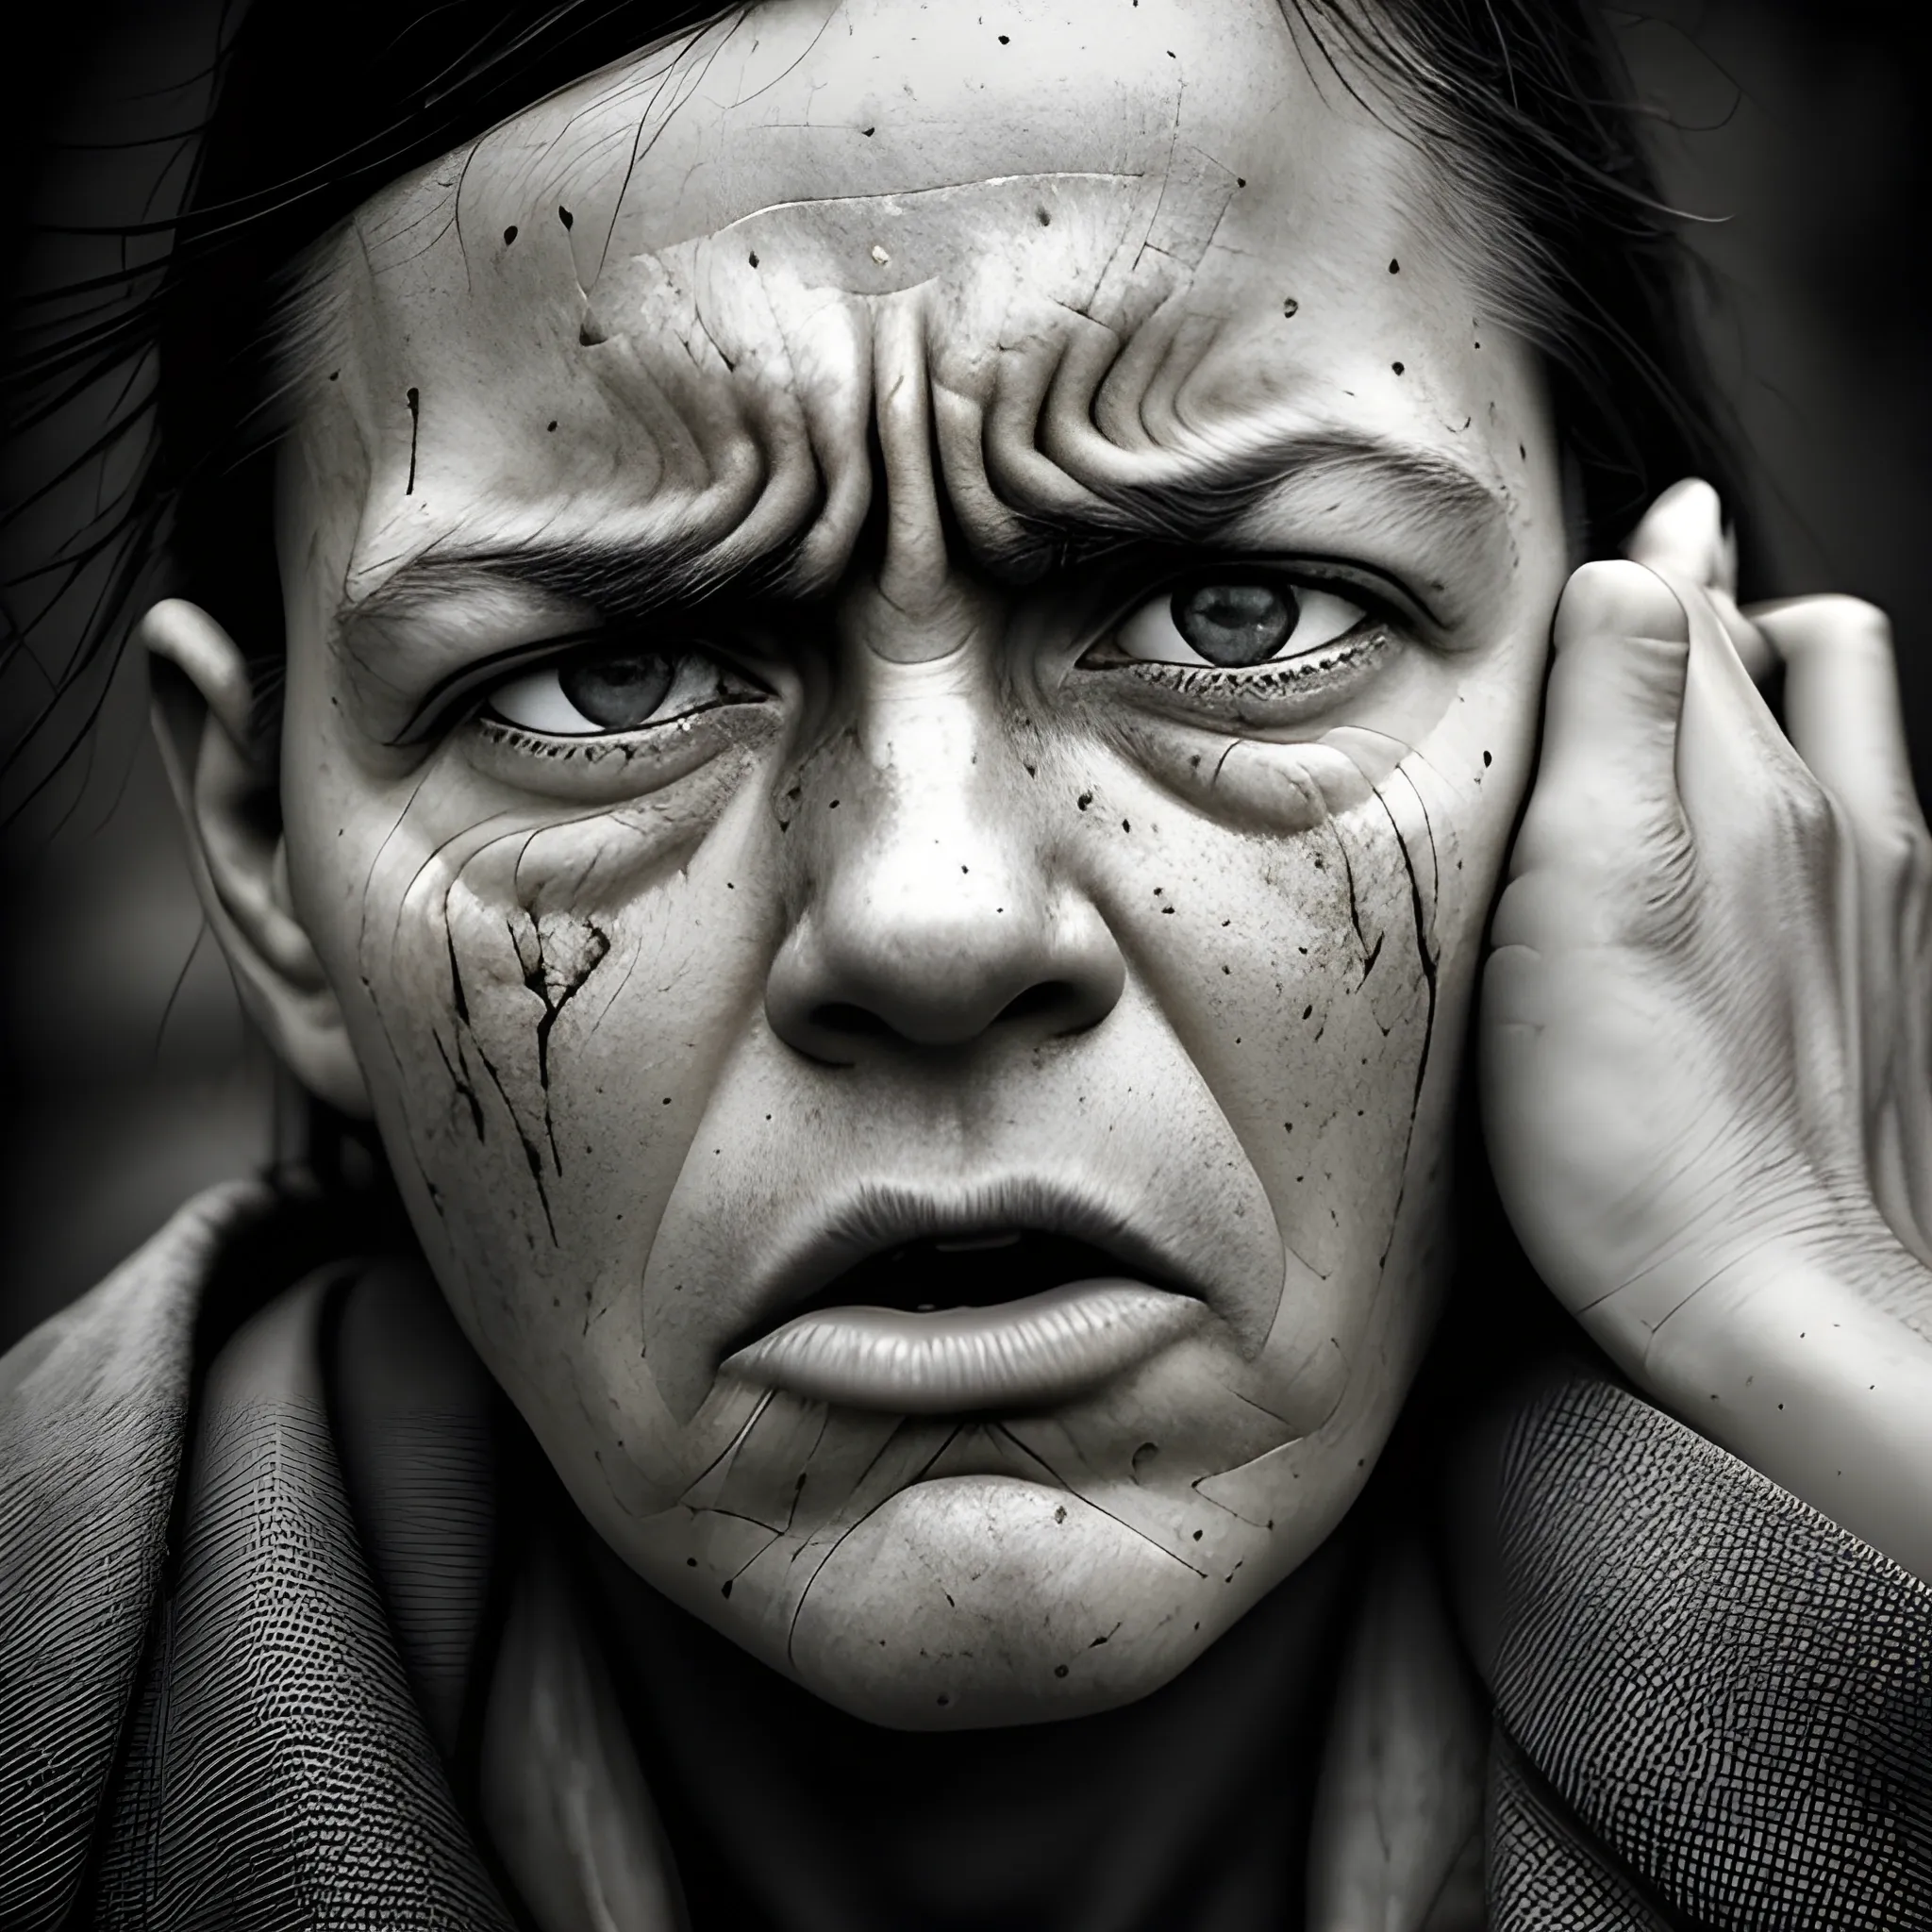 ```vbnet
Artistic Image Prompt:
Type of Image: HD Photograph.
Title: "Make It Stop"
Subject Description: Create a powerful and emotive HD photograph that conveys a sense of urgency, turmoil, or distress. The image should evoke strong emotions and prompt viewers to reflect on the theme of "Make It Stop."
Art Styles: Photojournalism, Documentary Photography.
Art Inspirations: Works by James Nachtwey, Don McCullin, and Sebastião Salgado.
Camera: Capture the essence of the moment with a high-resolution camera capable of capturing fine details and emotions.
Shot: Close-up or medium shot to emphasize the subject's emotions and expressions.
Render Related Information: Focus on capturing raw emotions through the subject's facial expressions, body language, or surrounding environment. Consider using dramatic lighting or contrasting colors to enhance the mood and evoke a sense of urgency. The image should tell a story or raise awareness about a pressing issue or a challenging situation. Pay attention to composition and framing to create a visually striking and thought-provoking photograph.